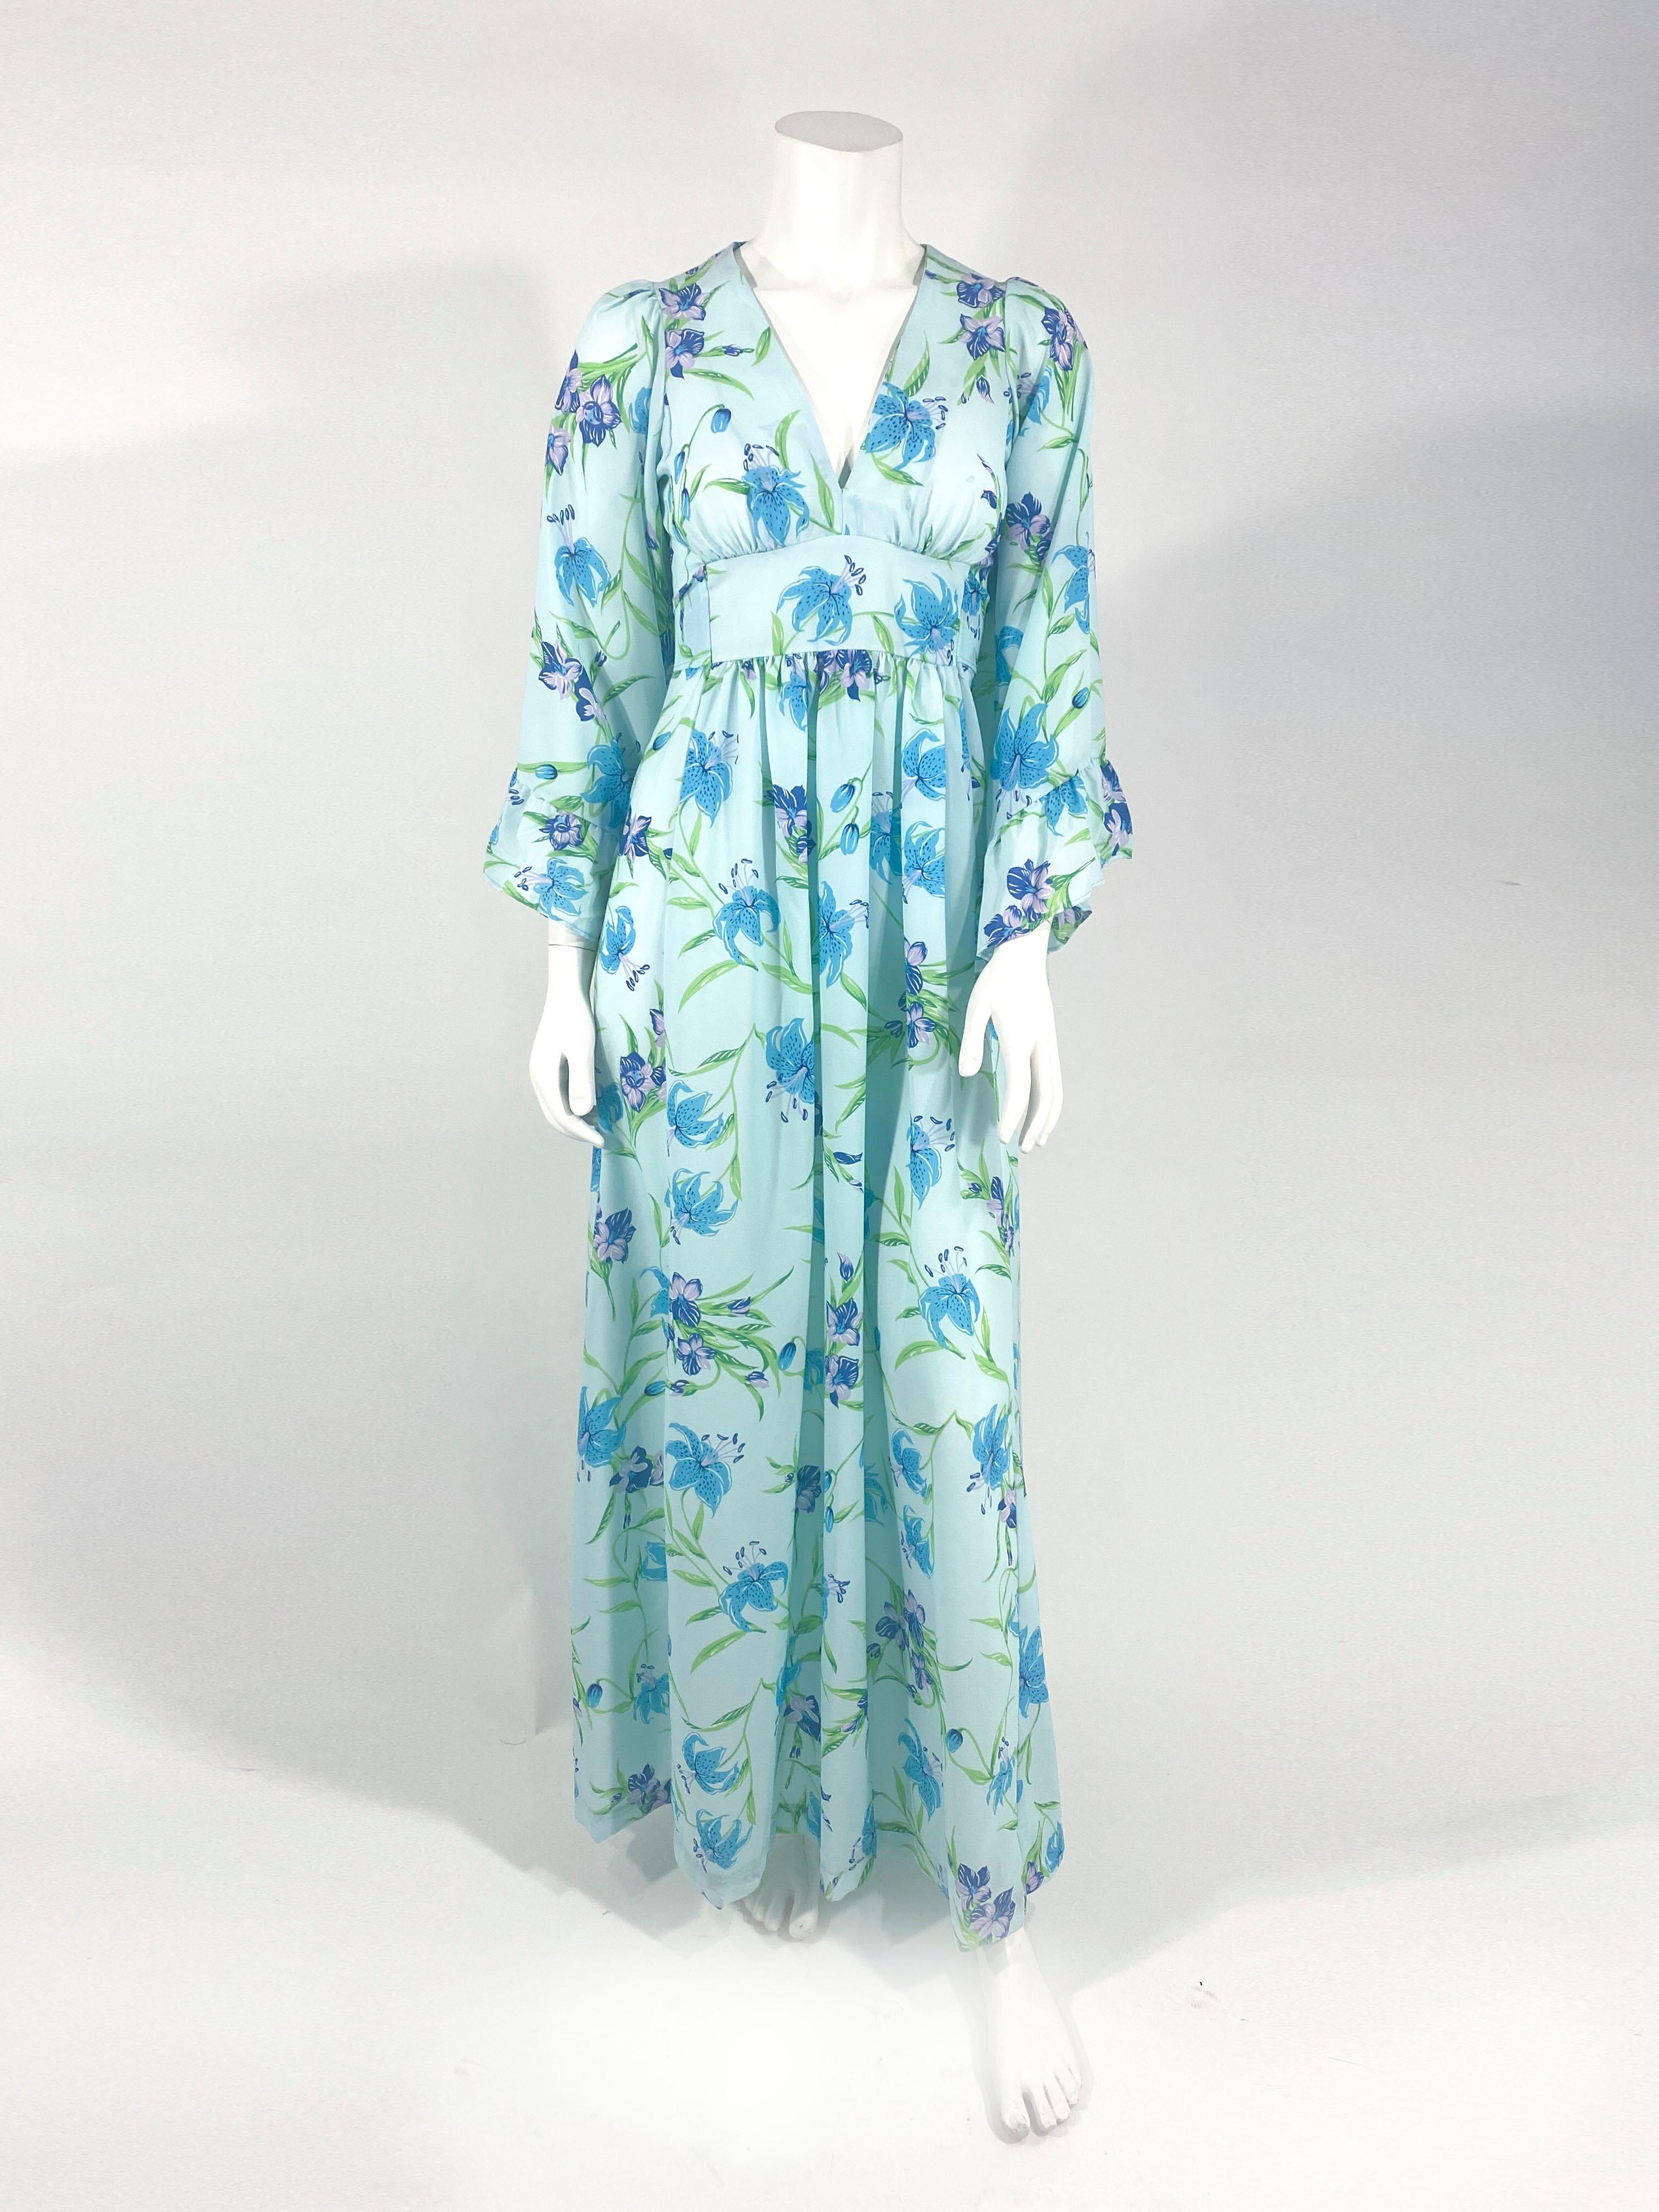 1970's bohemian aqua floral printed full length dress with a plunging neckline, full ruffled bell sleeves, an applied empire-waist sash that ties over the back zipper closure.